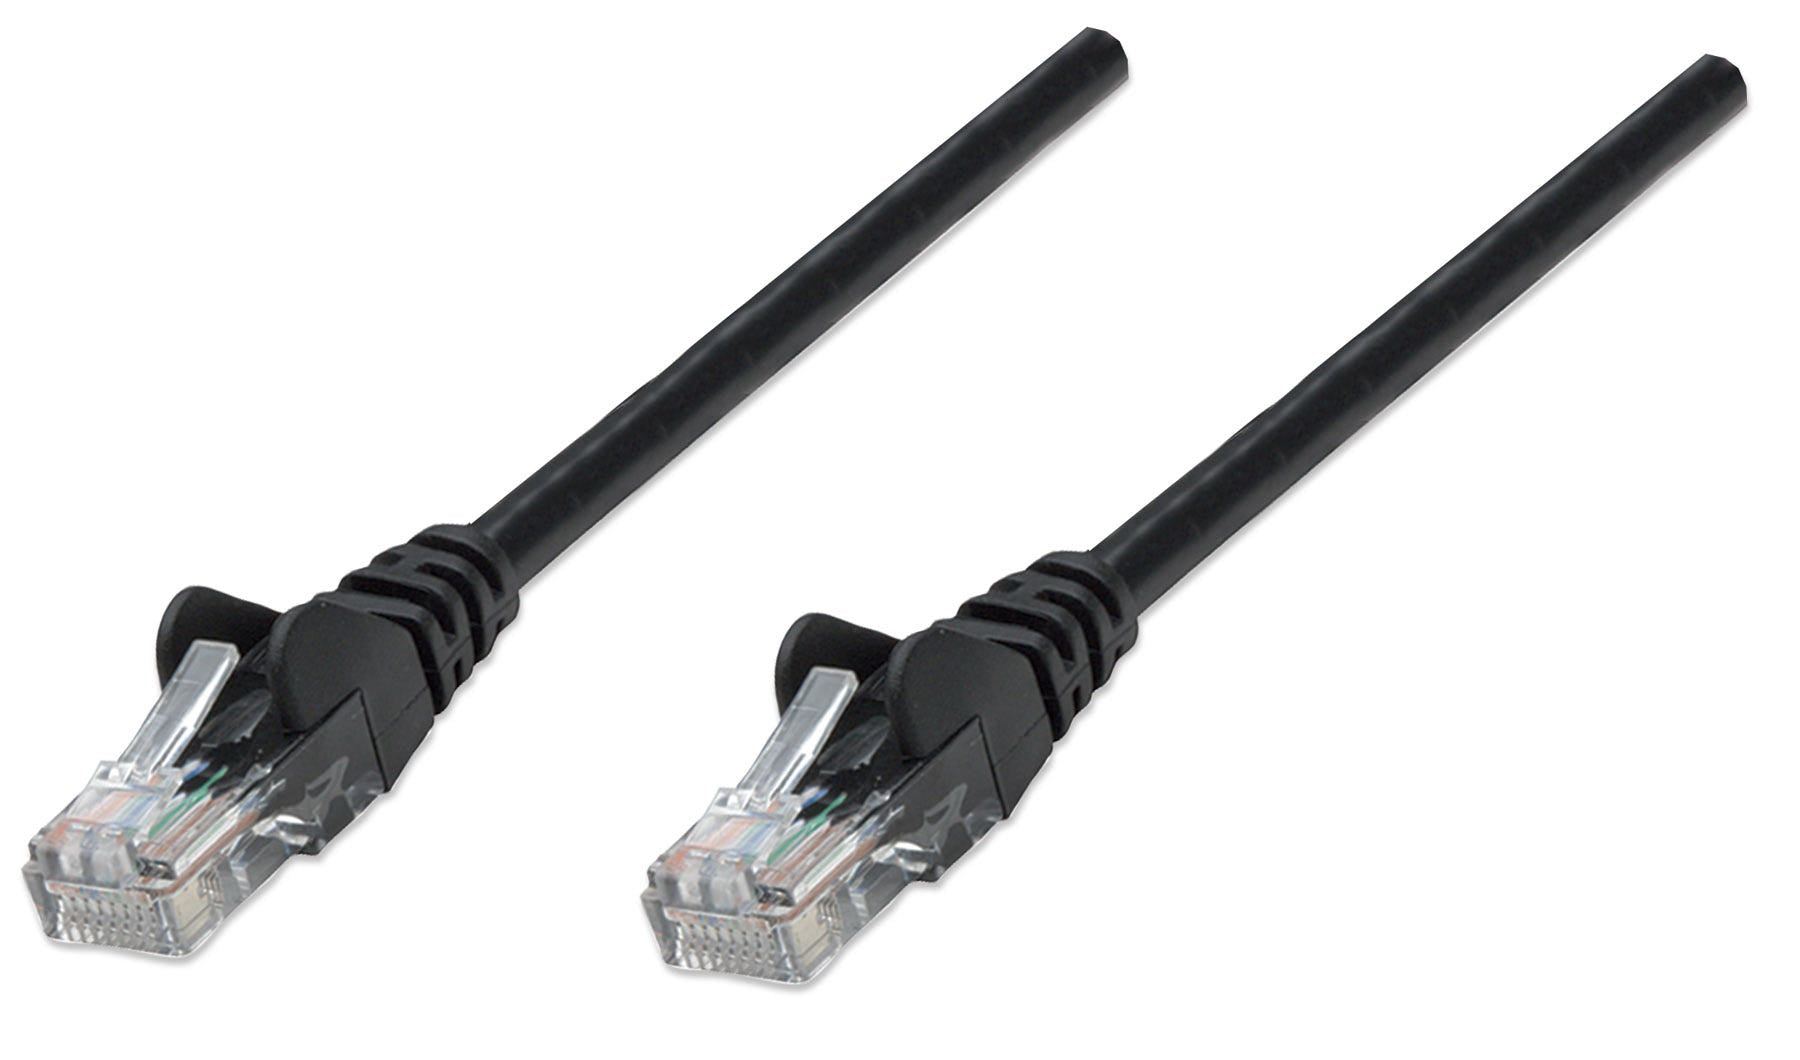 Intellinet Network Patch Cable, Cat5e, 1m, Black, CCA, U/UTP, PVC, RJ45, Gold Plated Contacts, Snagless, Booted, Lifetime Warranty, Polybag